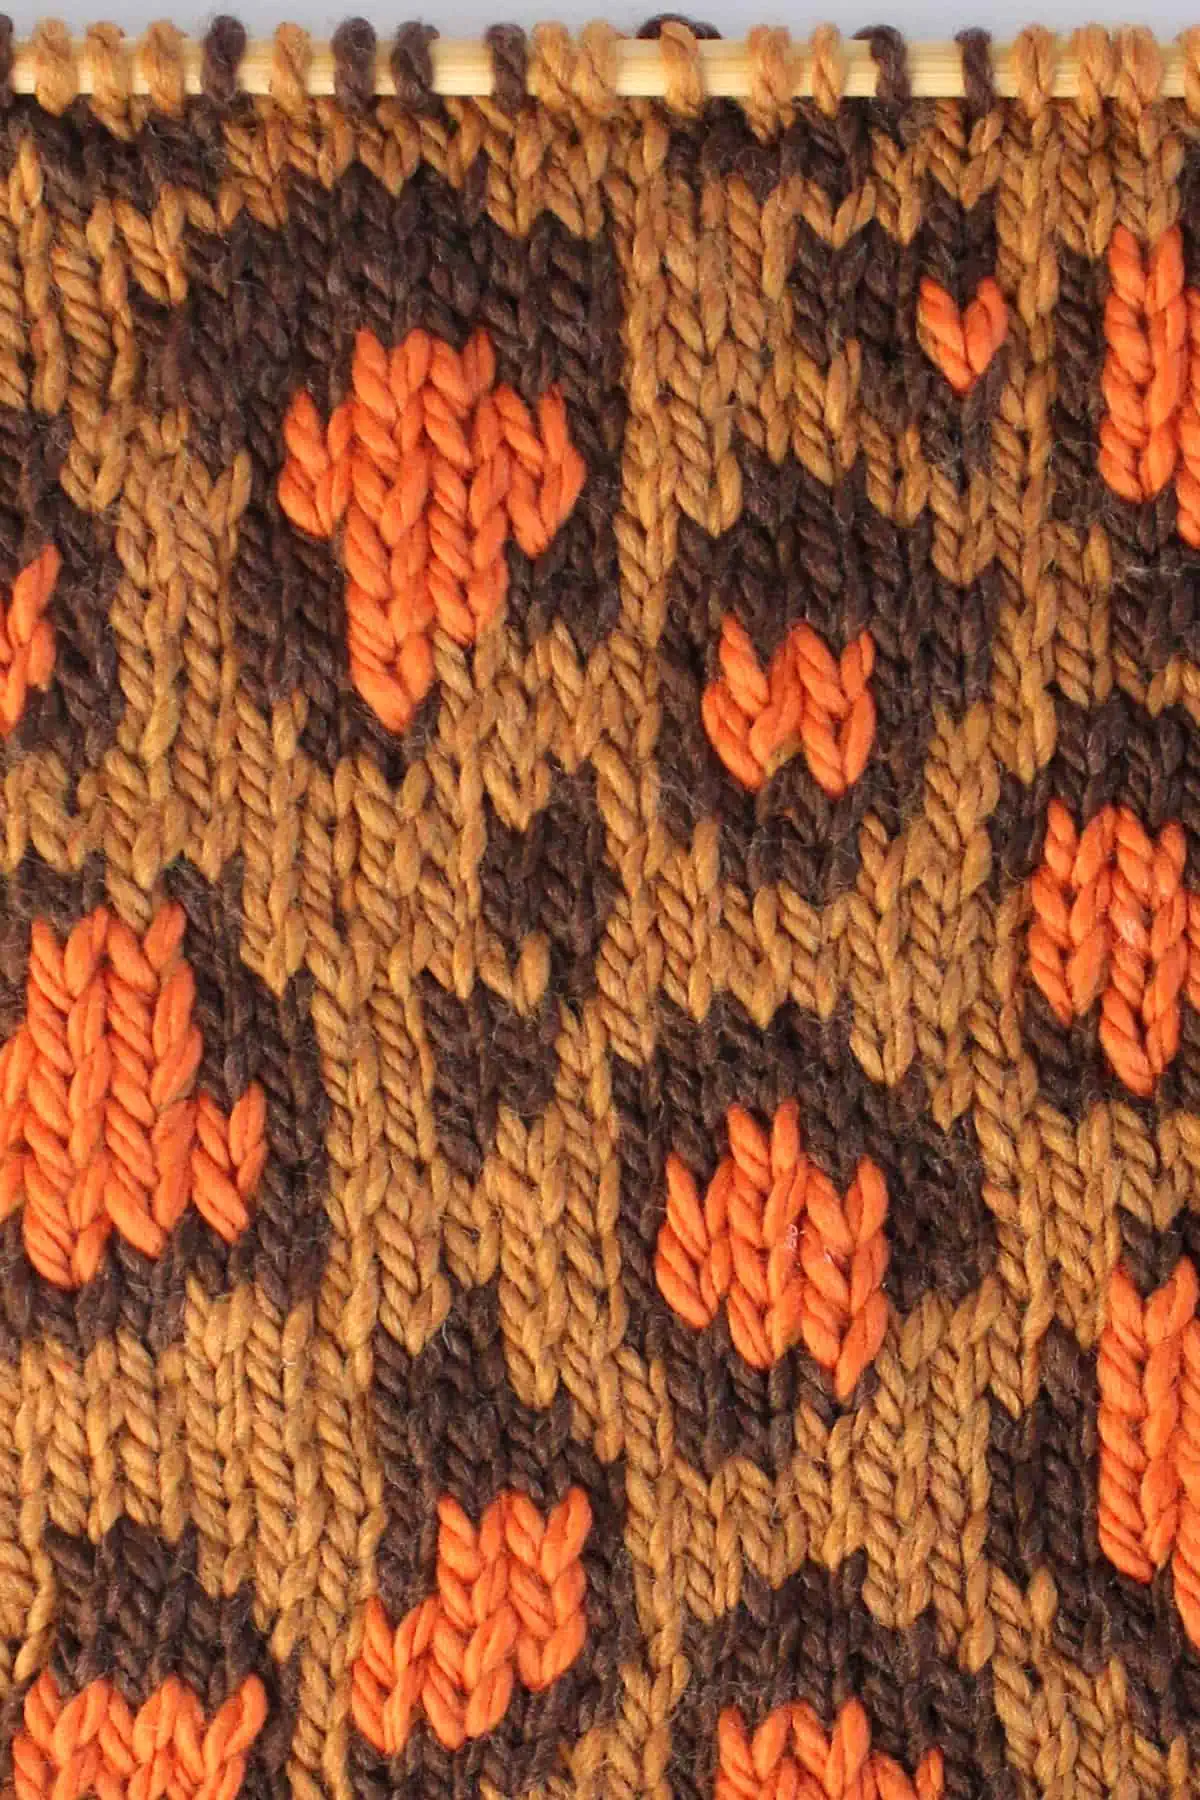 Leopard Print knit stitch stranded colorwork pattern in tan, dark brown, and orange colored yarn on a knitting needle.